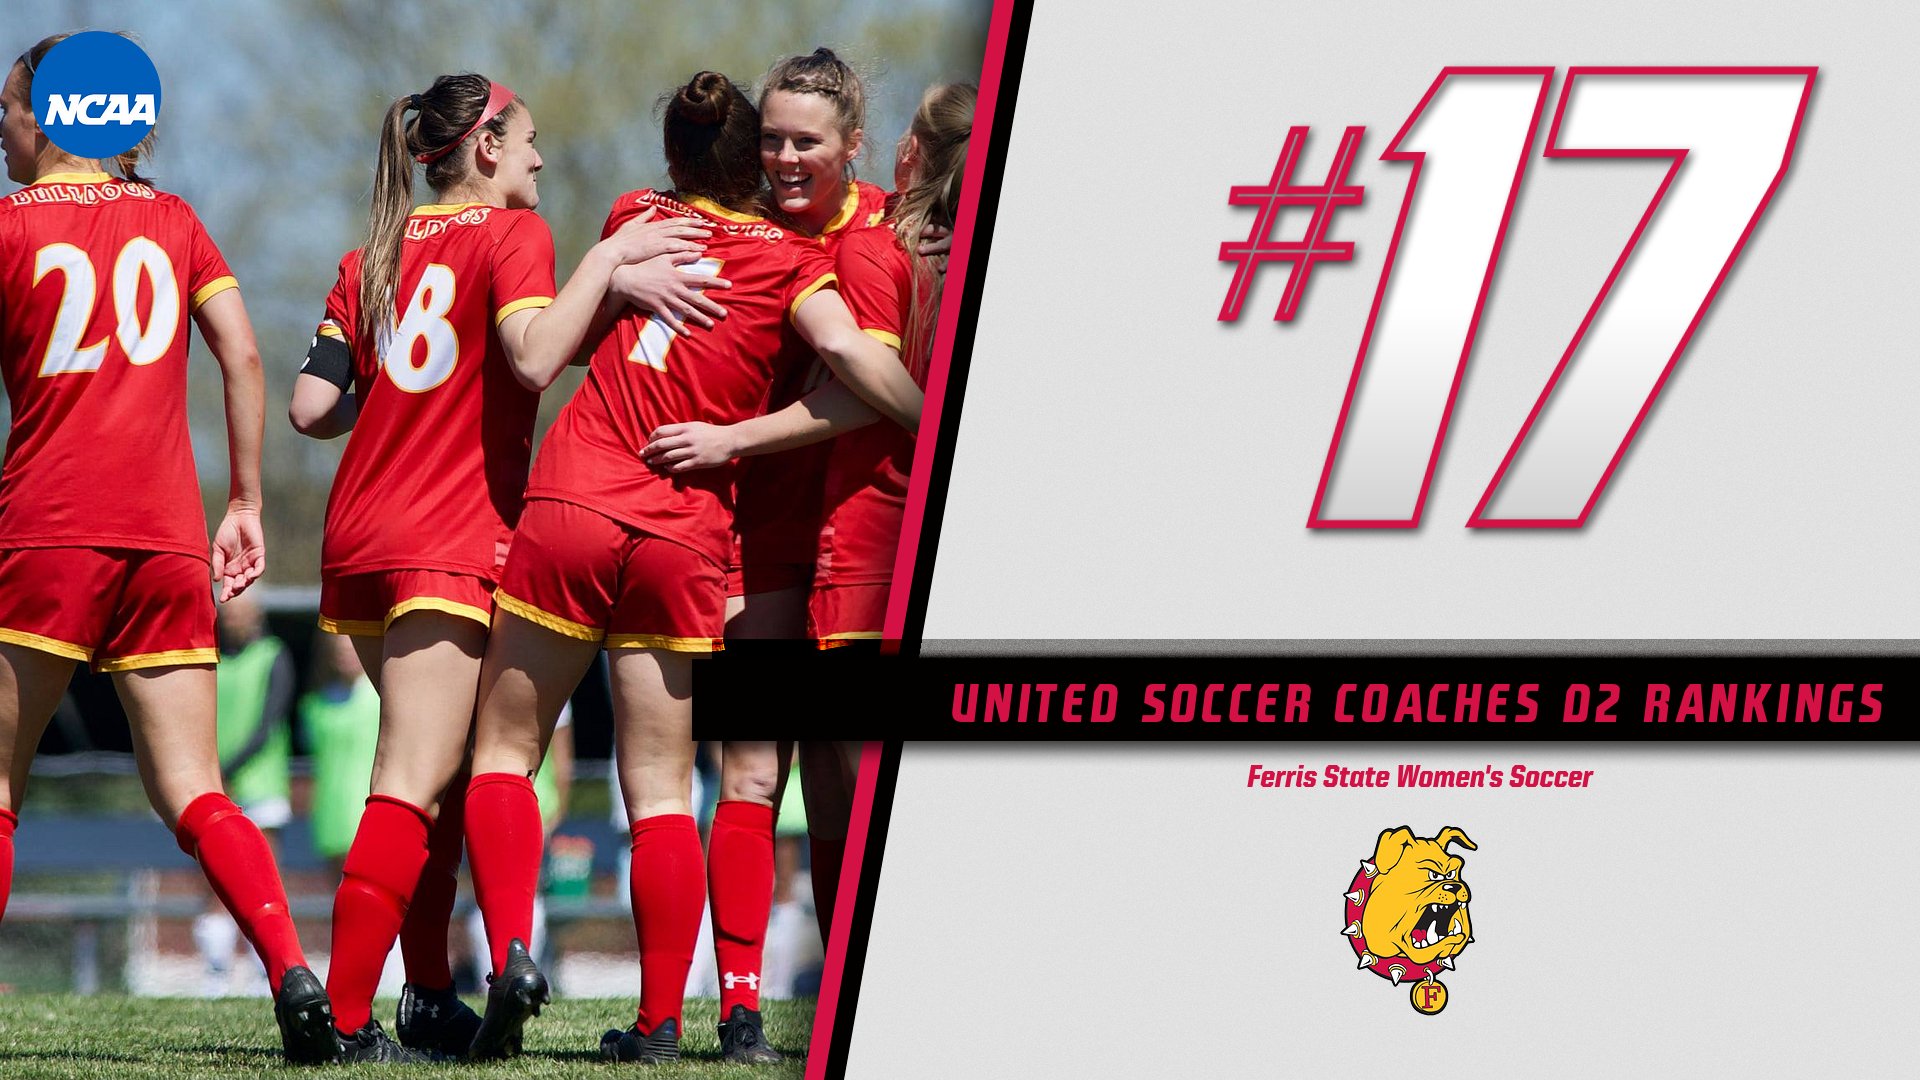 Ferris State Women's Soccer Finishes #17 Nationally In Final United Soccer Coaches Poll